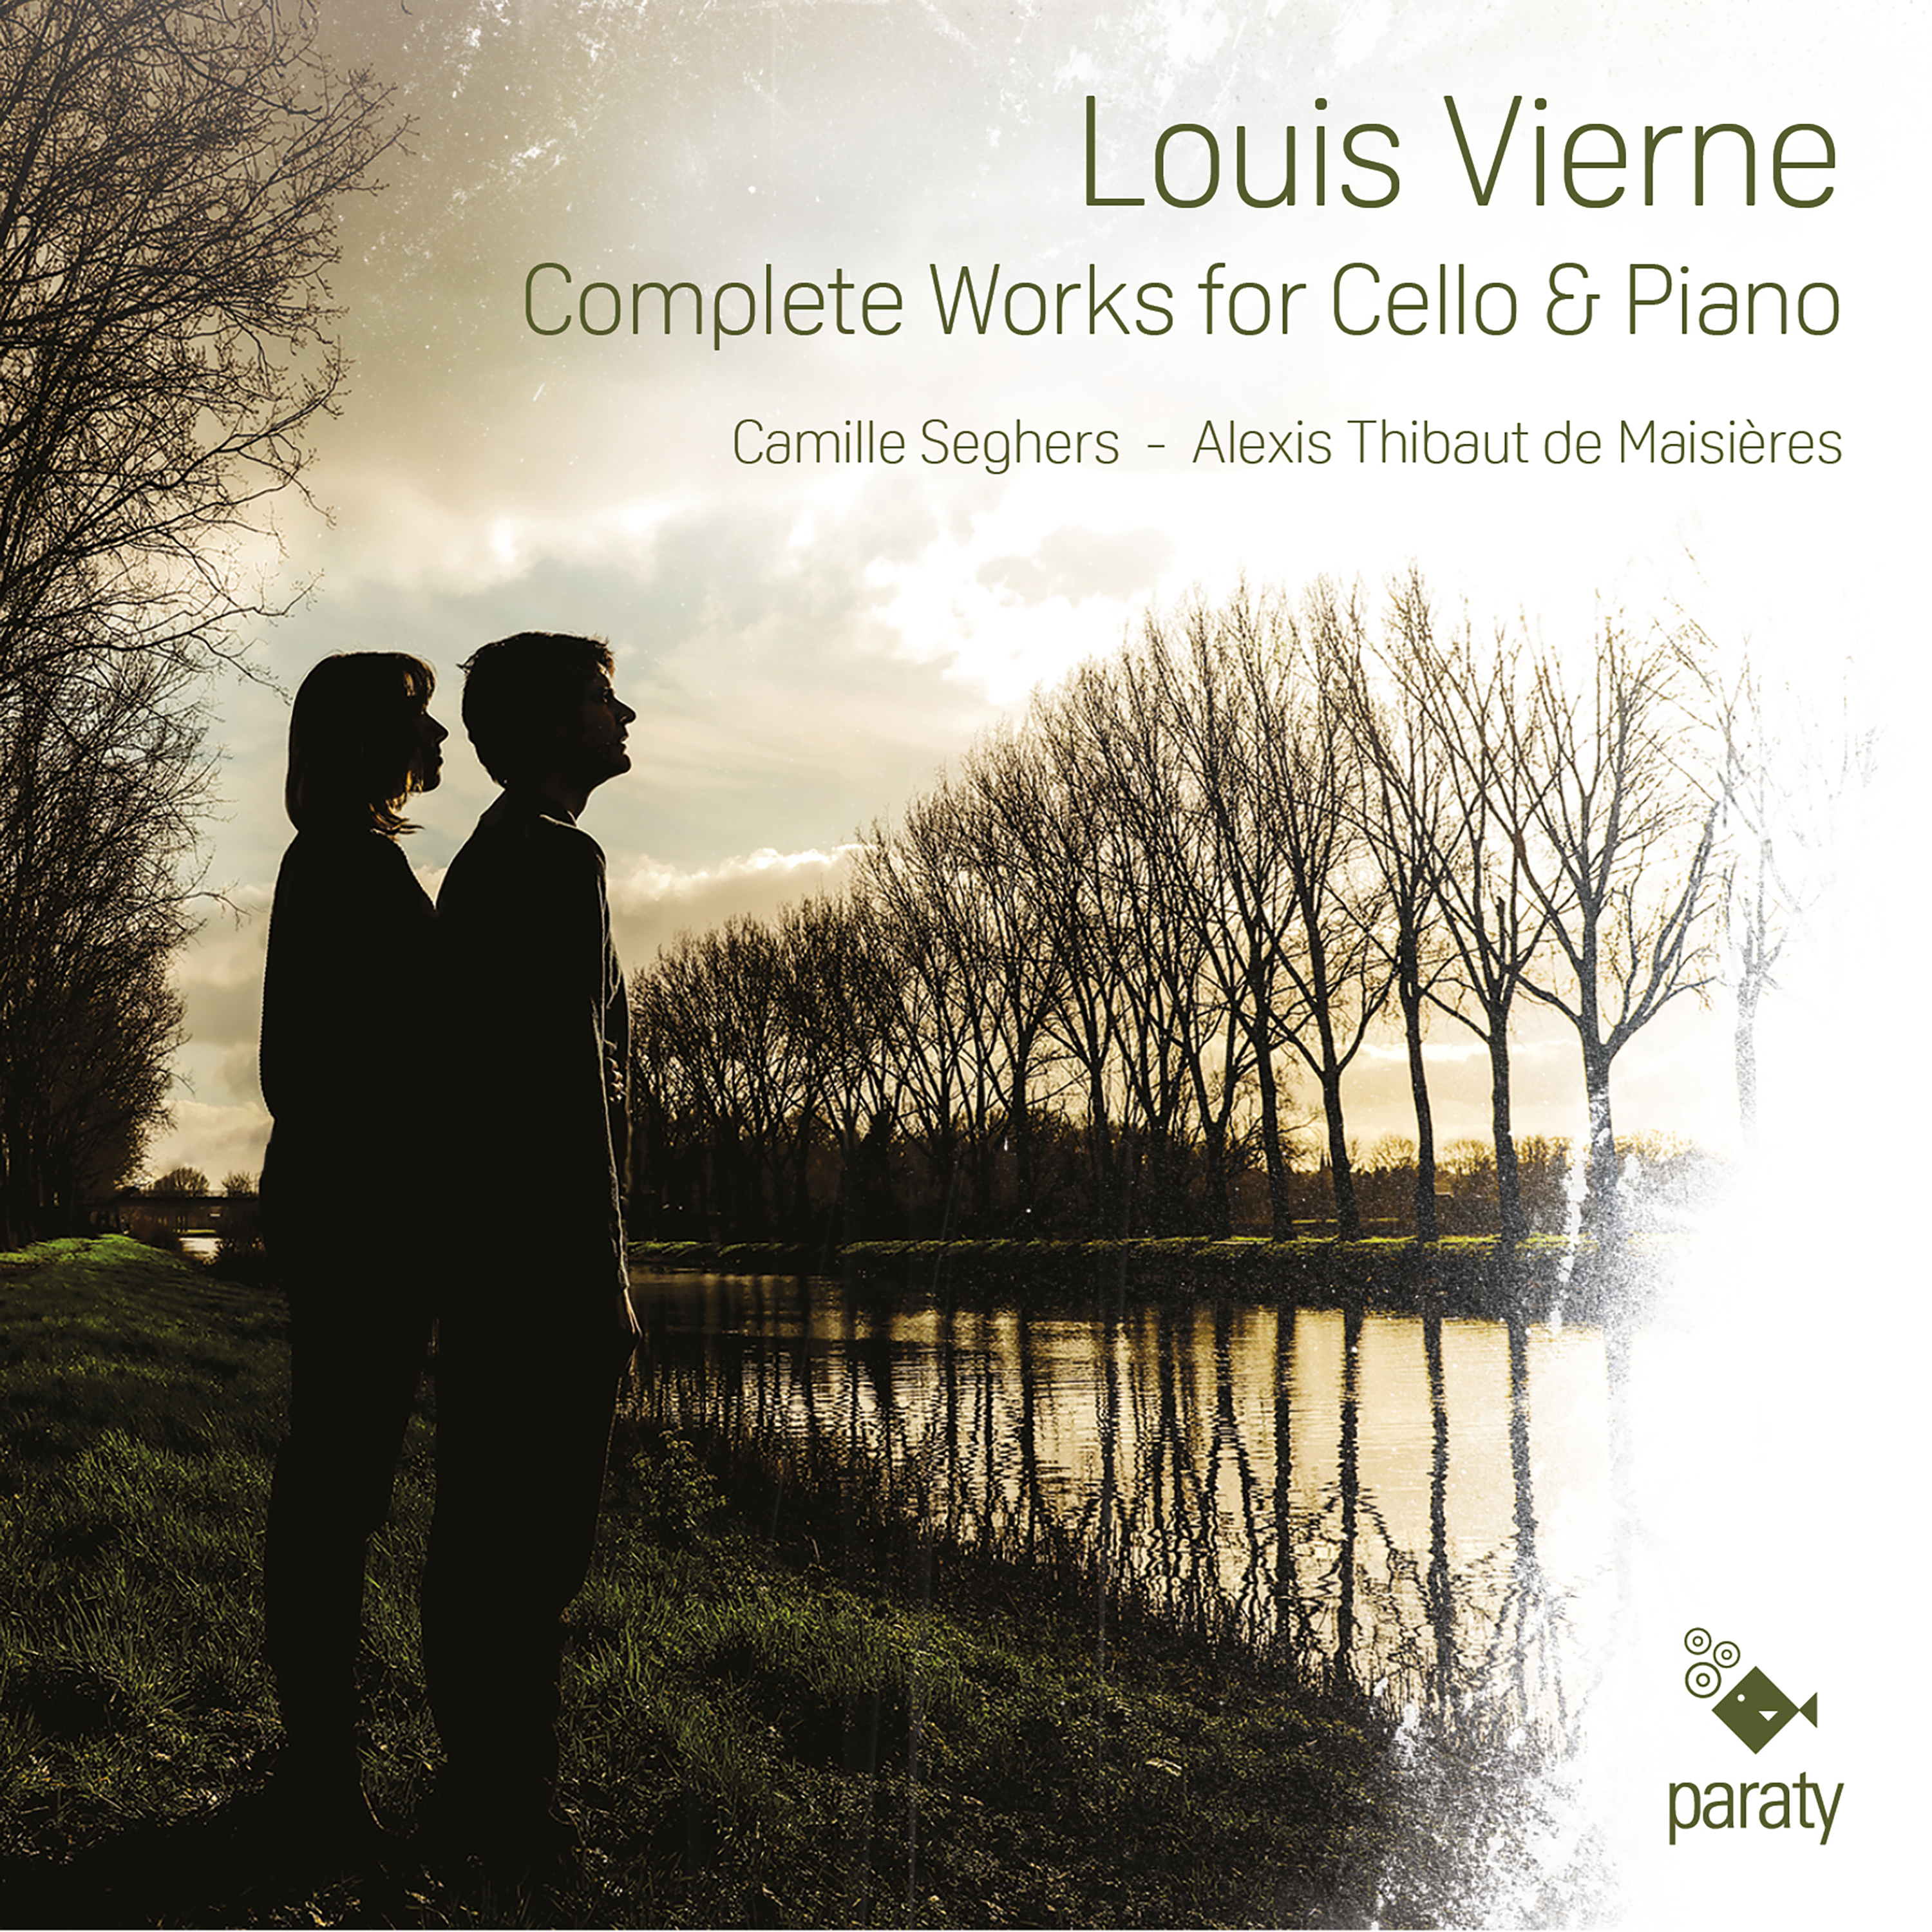 Louis Vierne, Complete Works for Cello & Piano